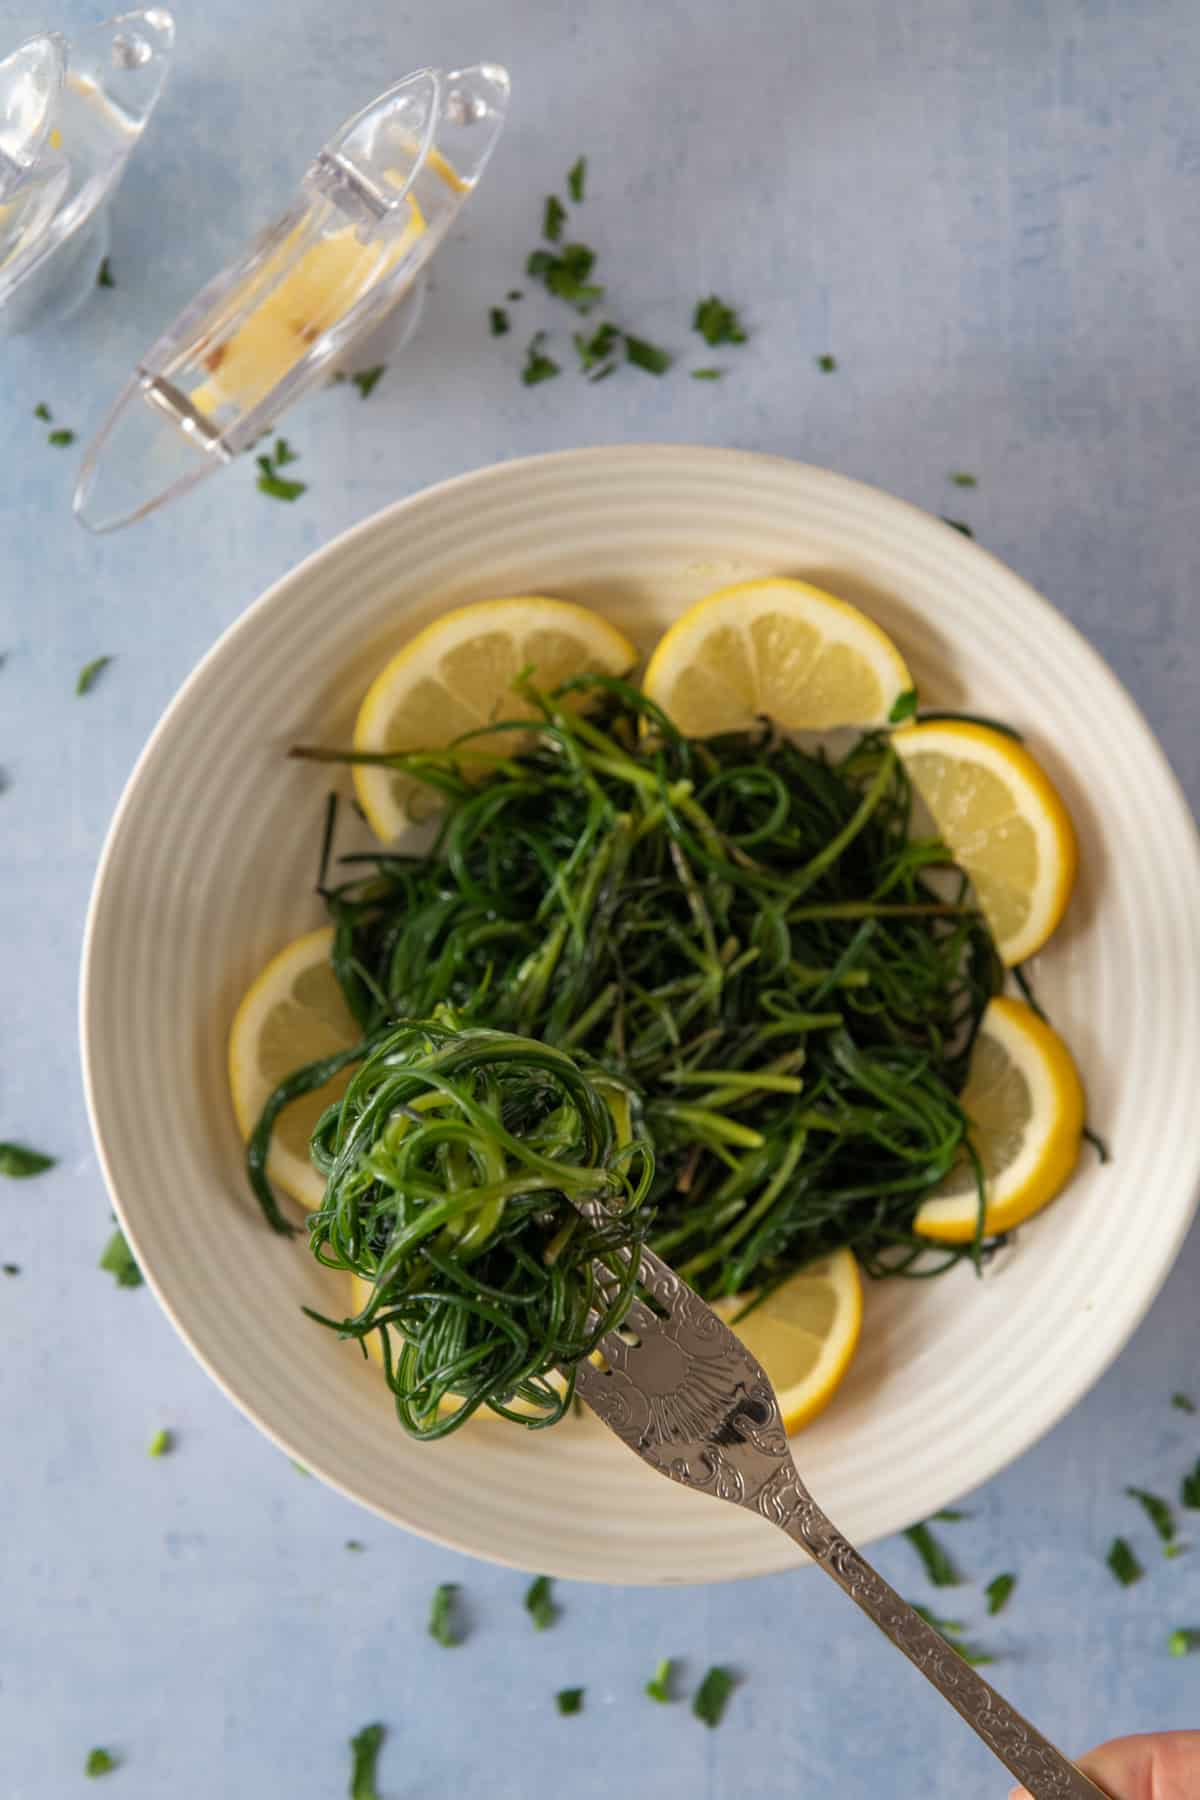 agretti served with olive oil and lemon wedges